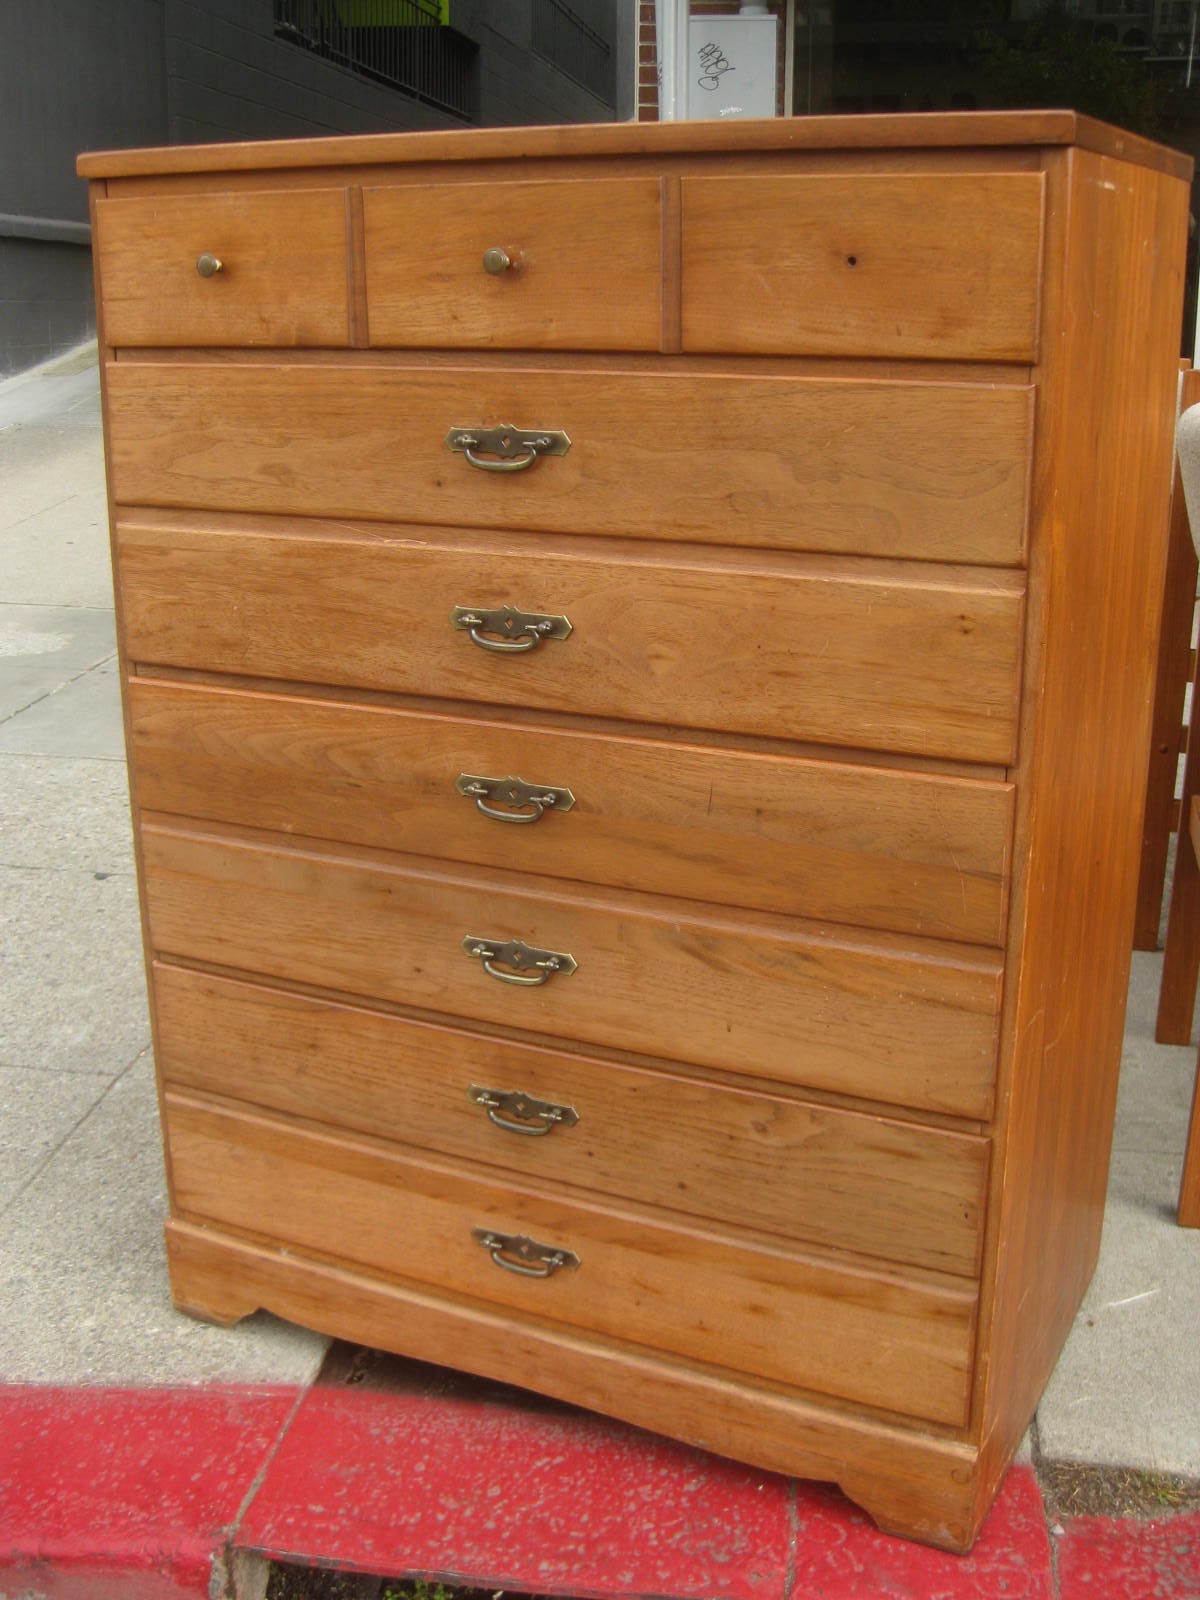 UHURU FURNITURE & COLLECTIBLES: SOLD - Kroehler Chest of Drawers - $125